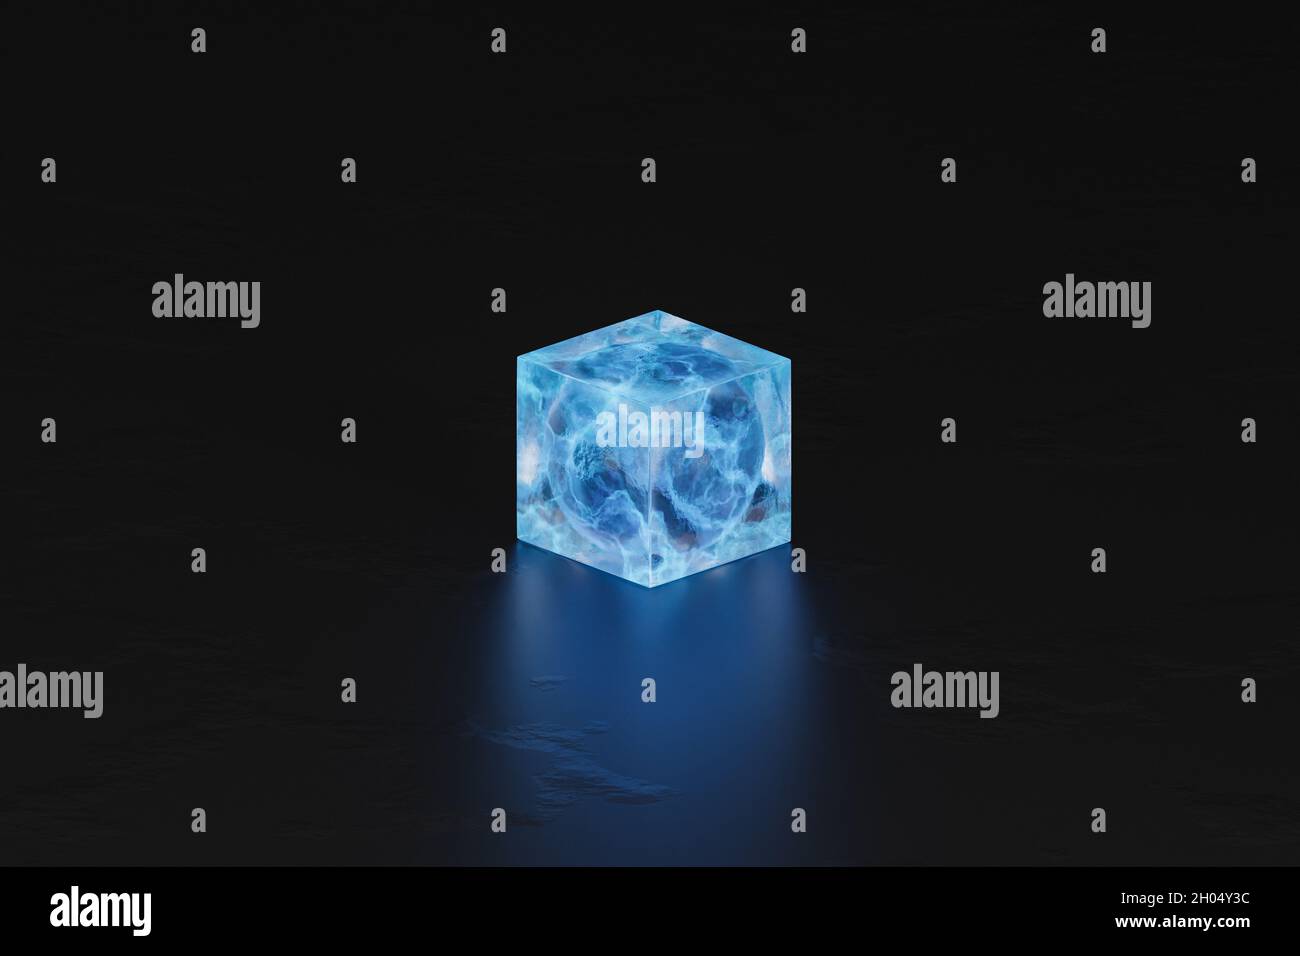 Abstract blue cube on black background, 3d illustration render Stock Photo